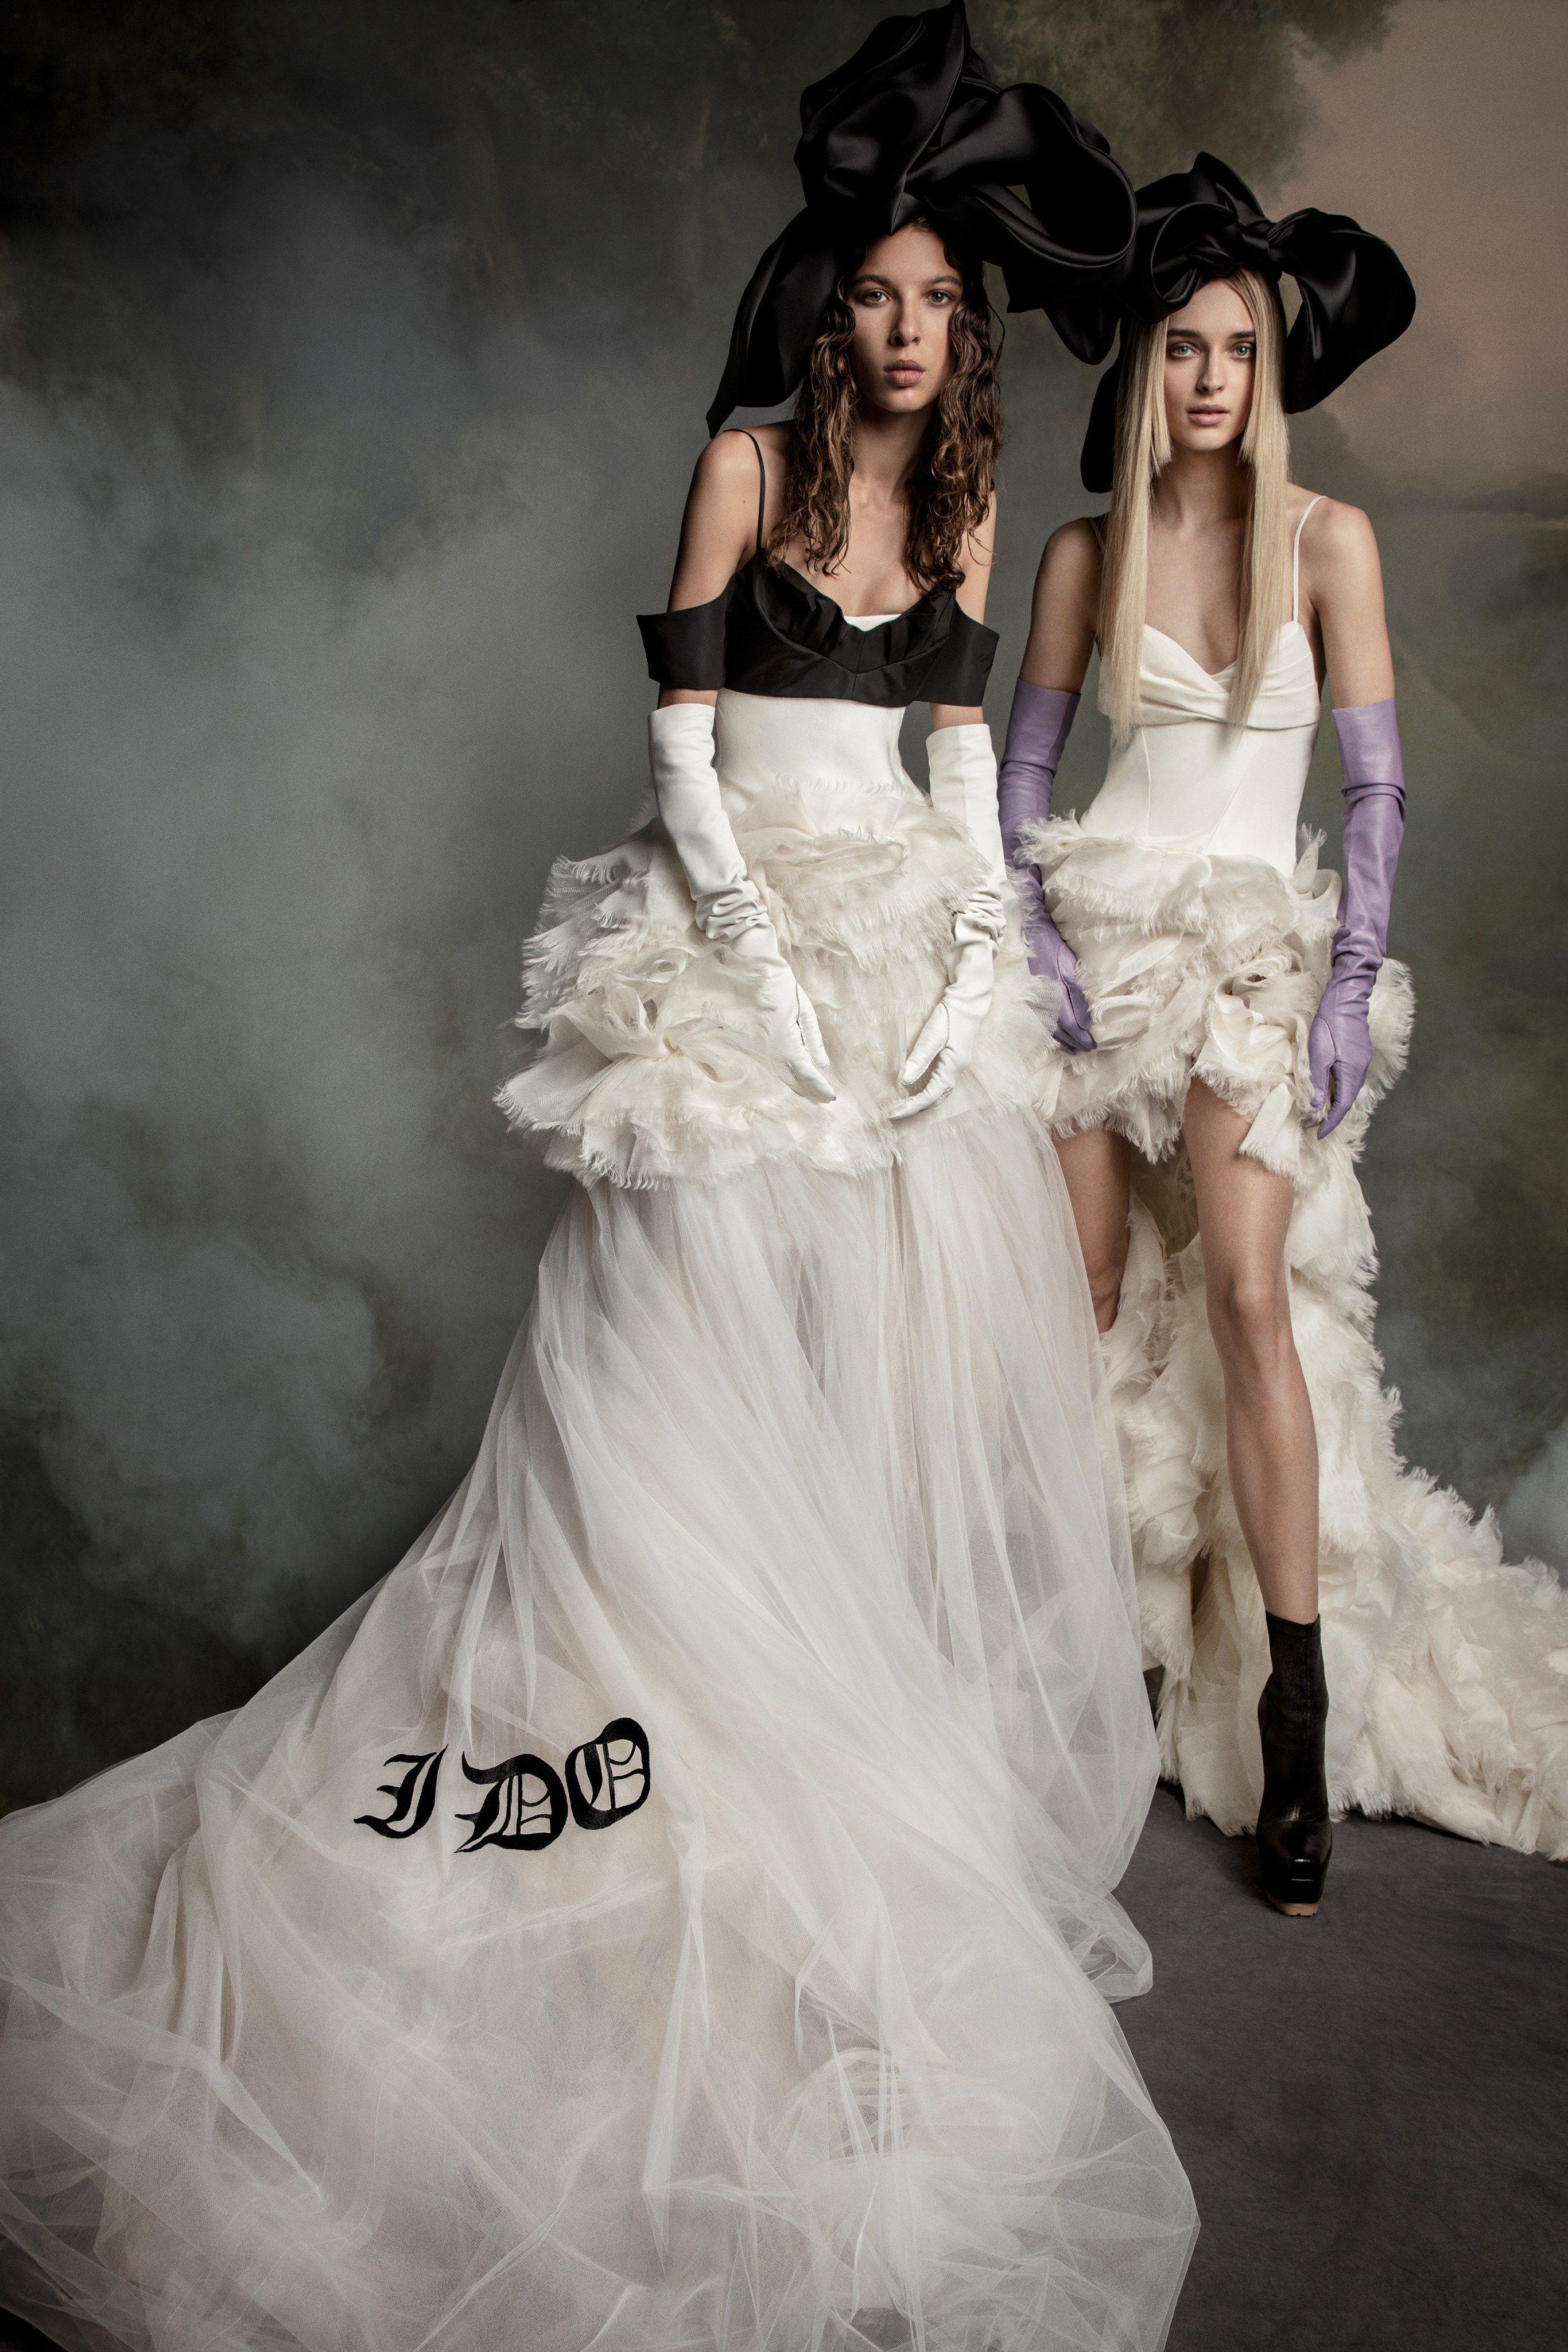 2020 bridal gowns